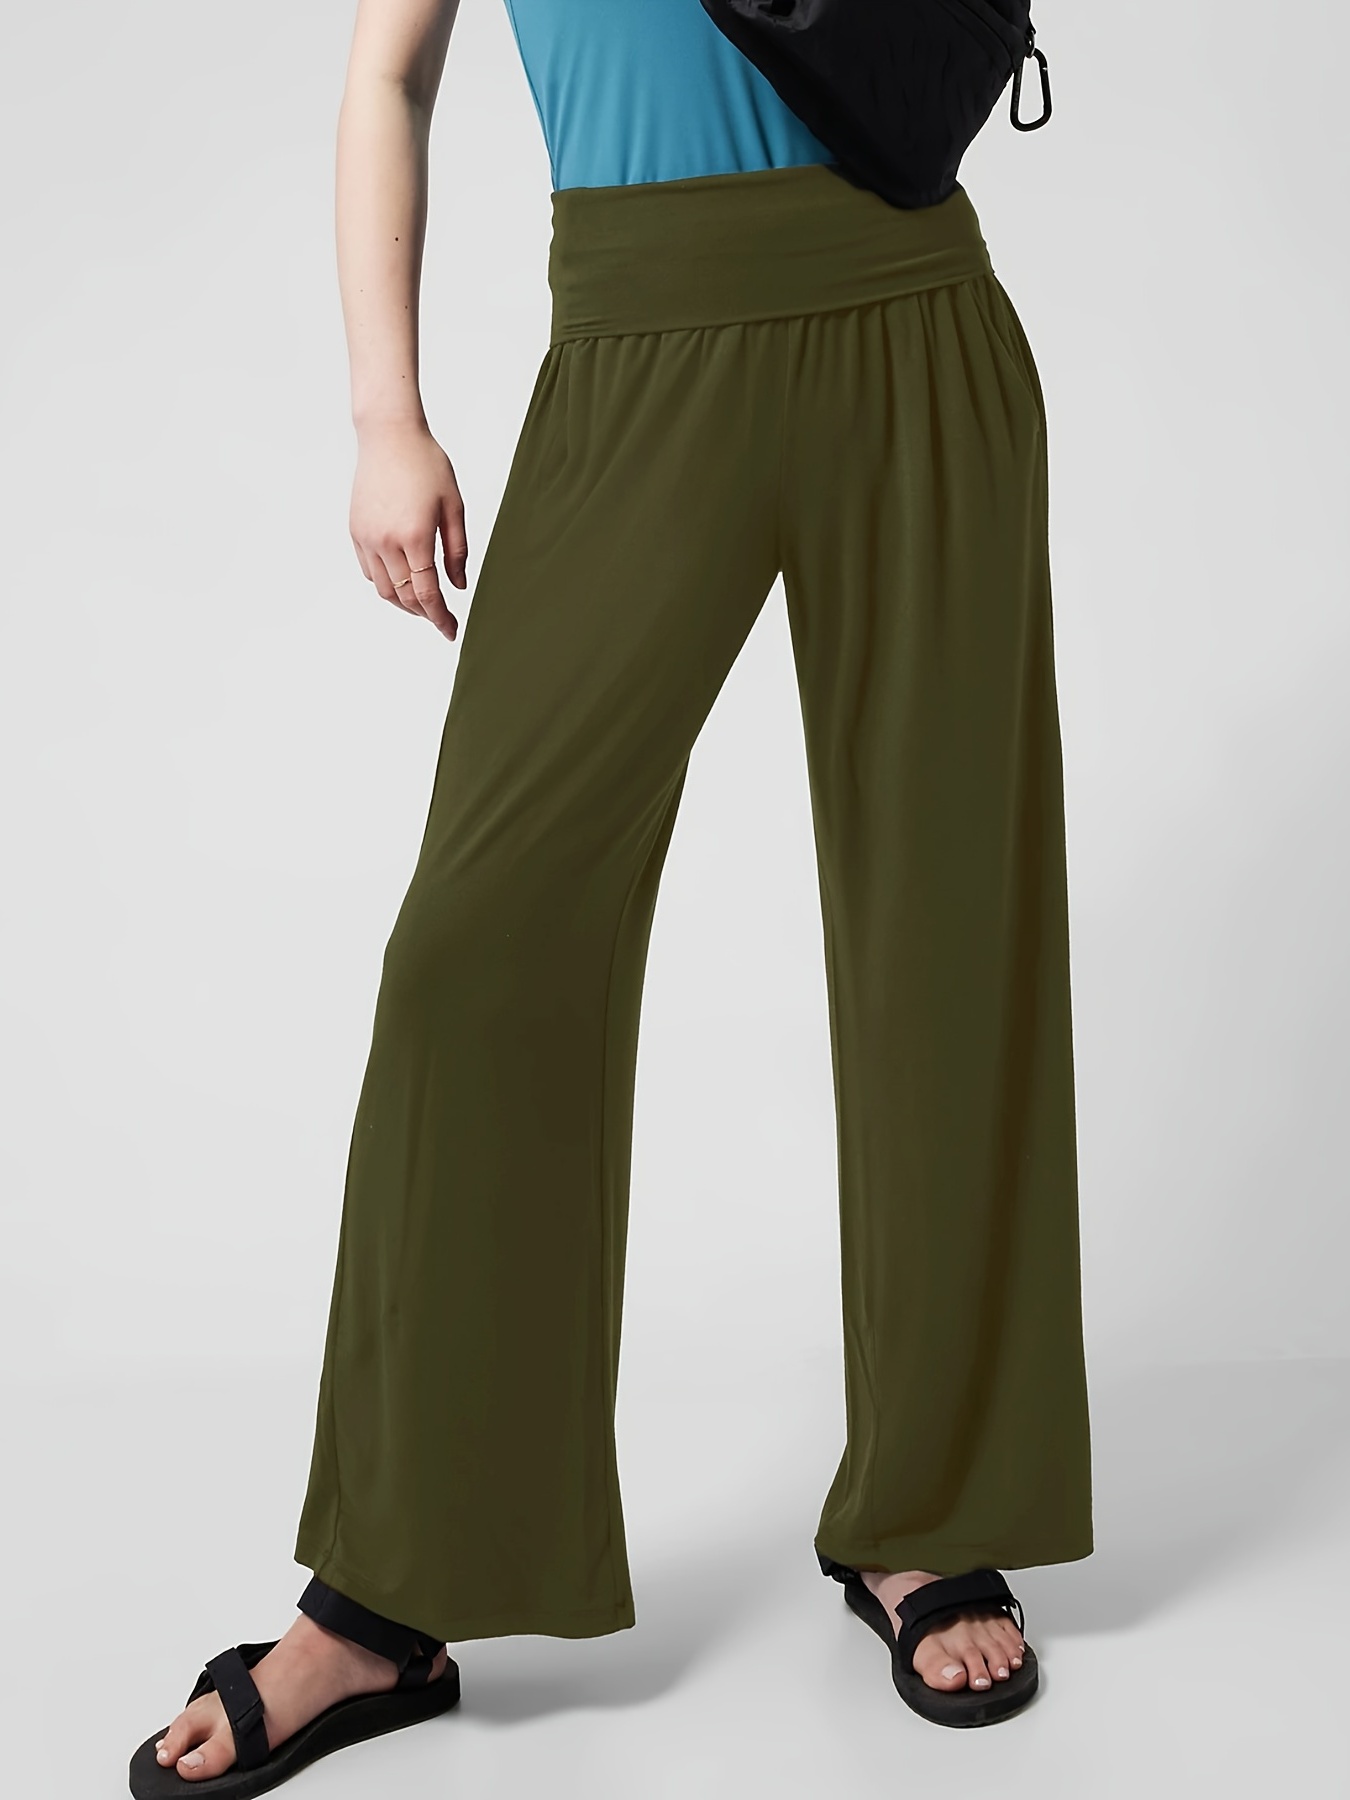 Sczwkhg Deals Under $4 High Waisted Yoga Pants for Women Wide Leg Workout  Yoga Pants Athleta Leggings Casual Loose Lounge Slit Sweatpants Army Green  at  Women's Clothing store